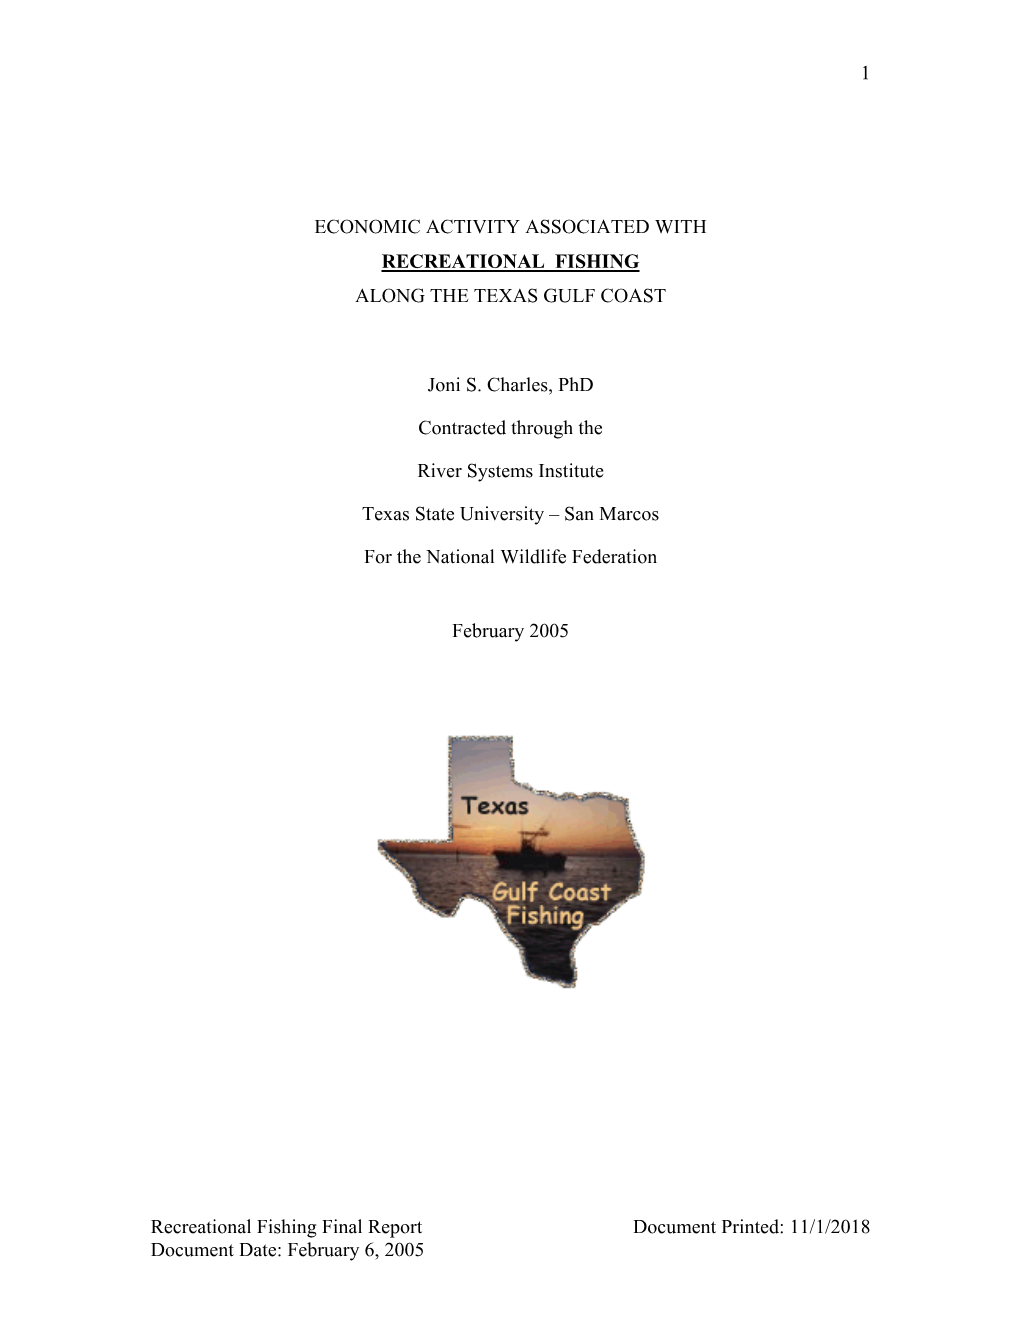 Recreational Fishing Final Report Document Printed: 11/1/2018 Document Date: February 6, 2005 2